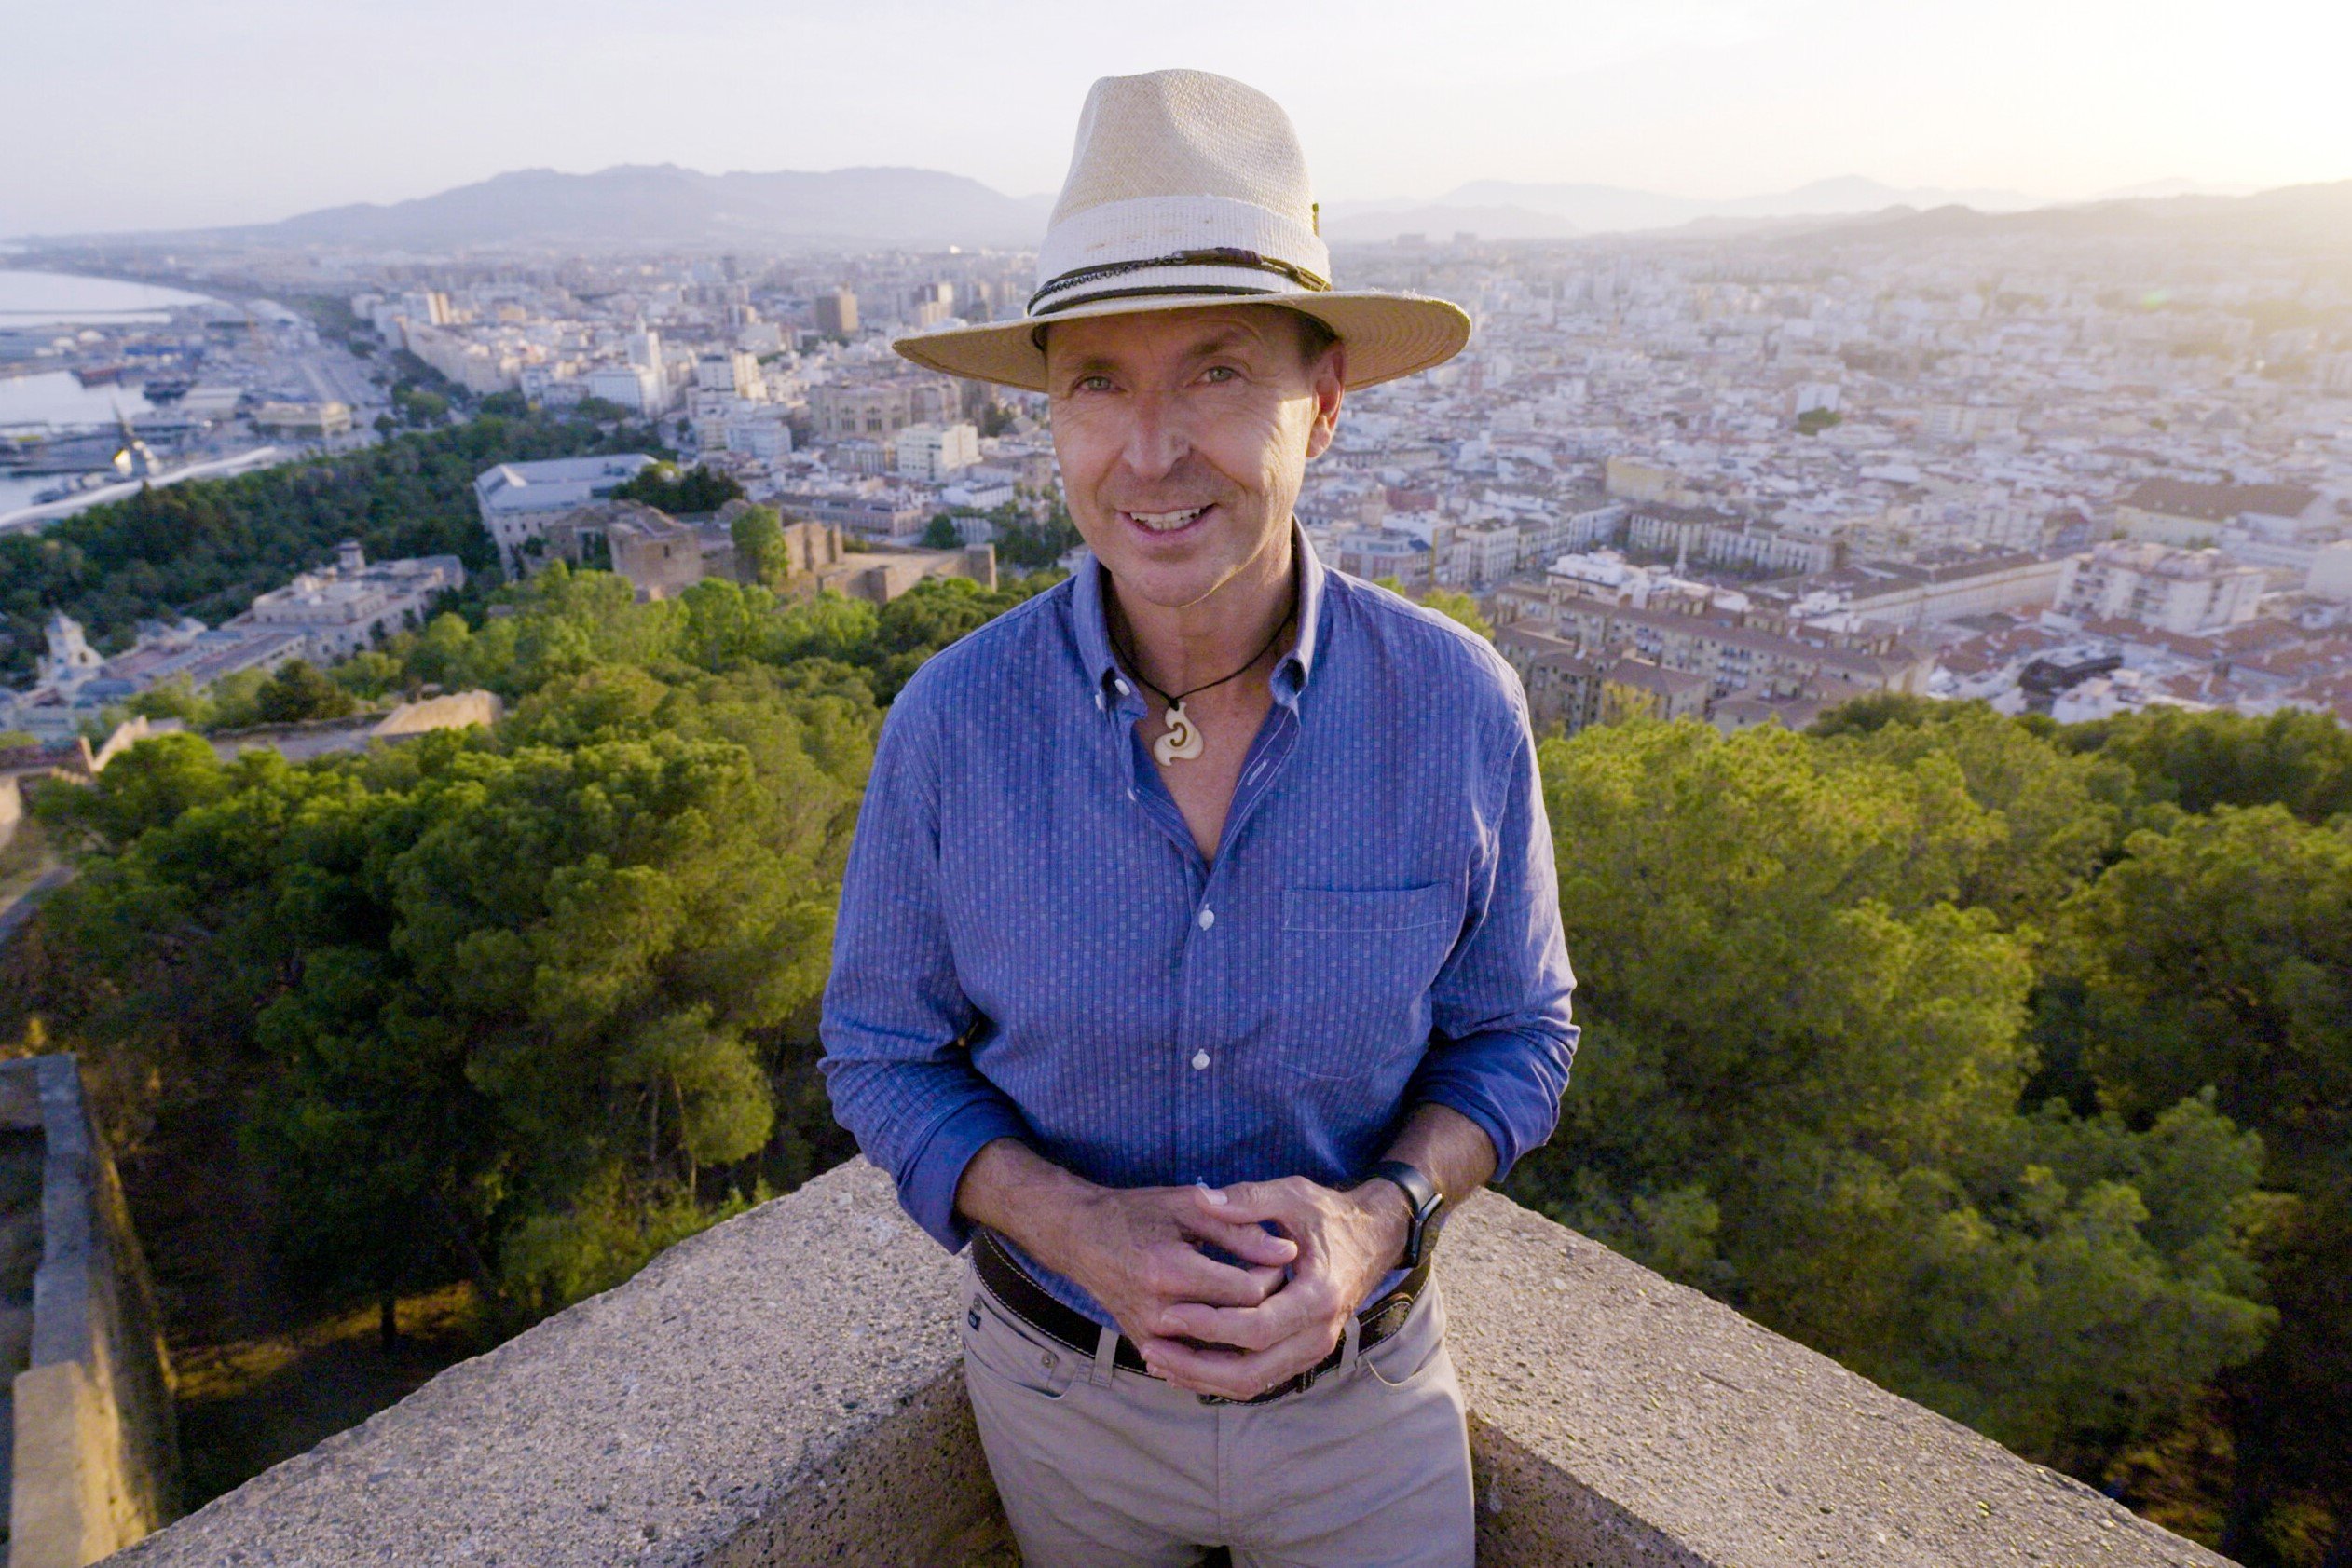 Phil Keoghan, who, according to spoilers, will host 'The Amazing Race 35' on CBS, wears a blue patterned button-down shirt, khakis, and a tan hat.